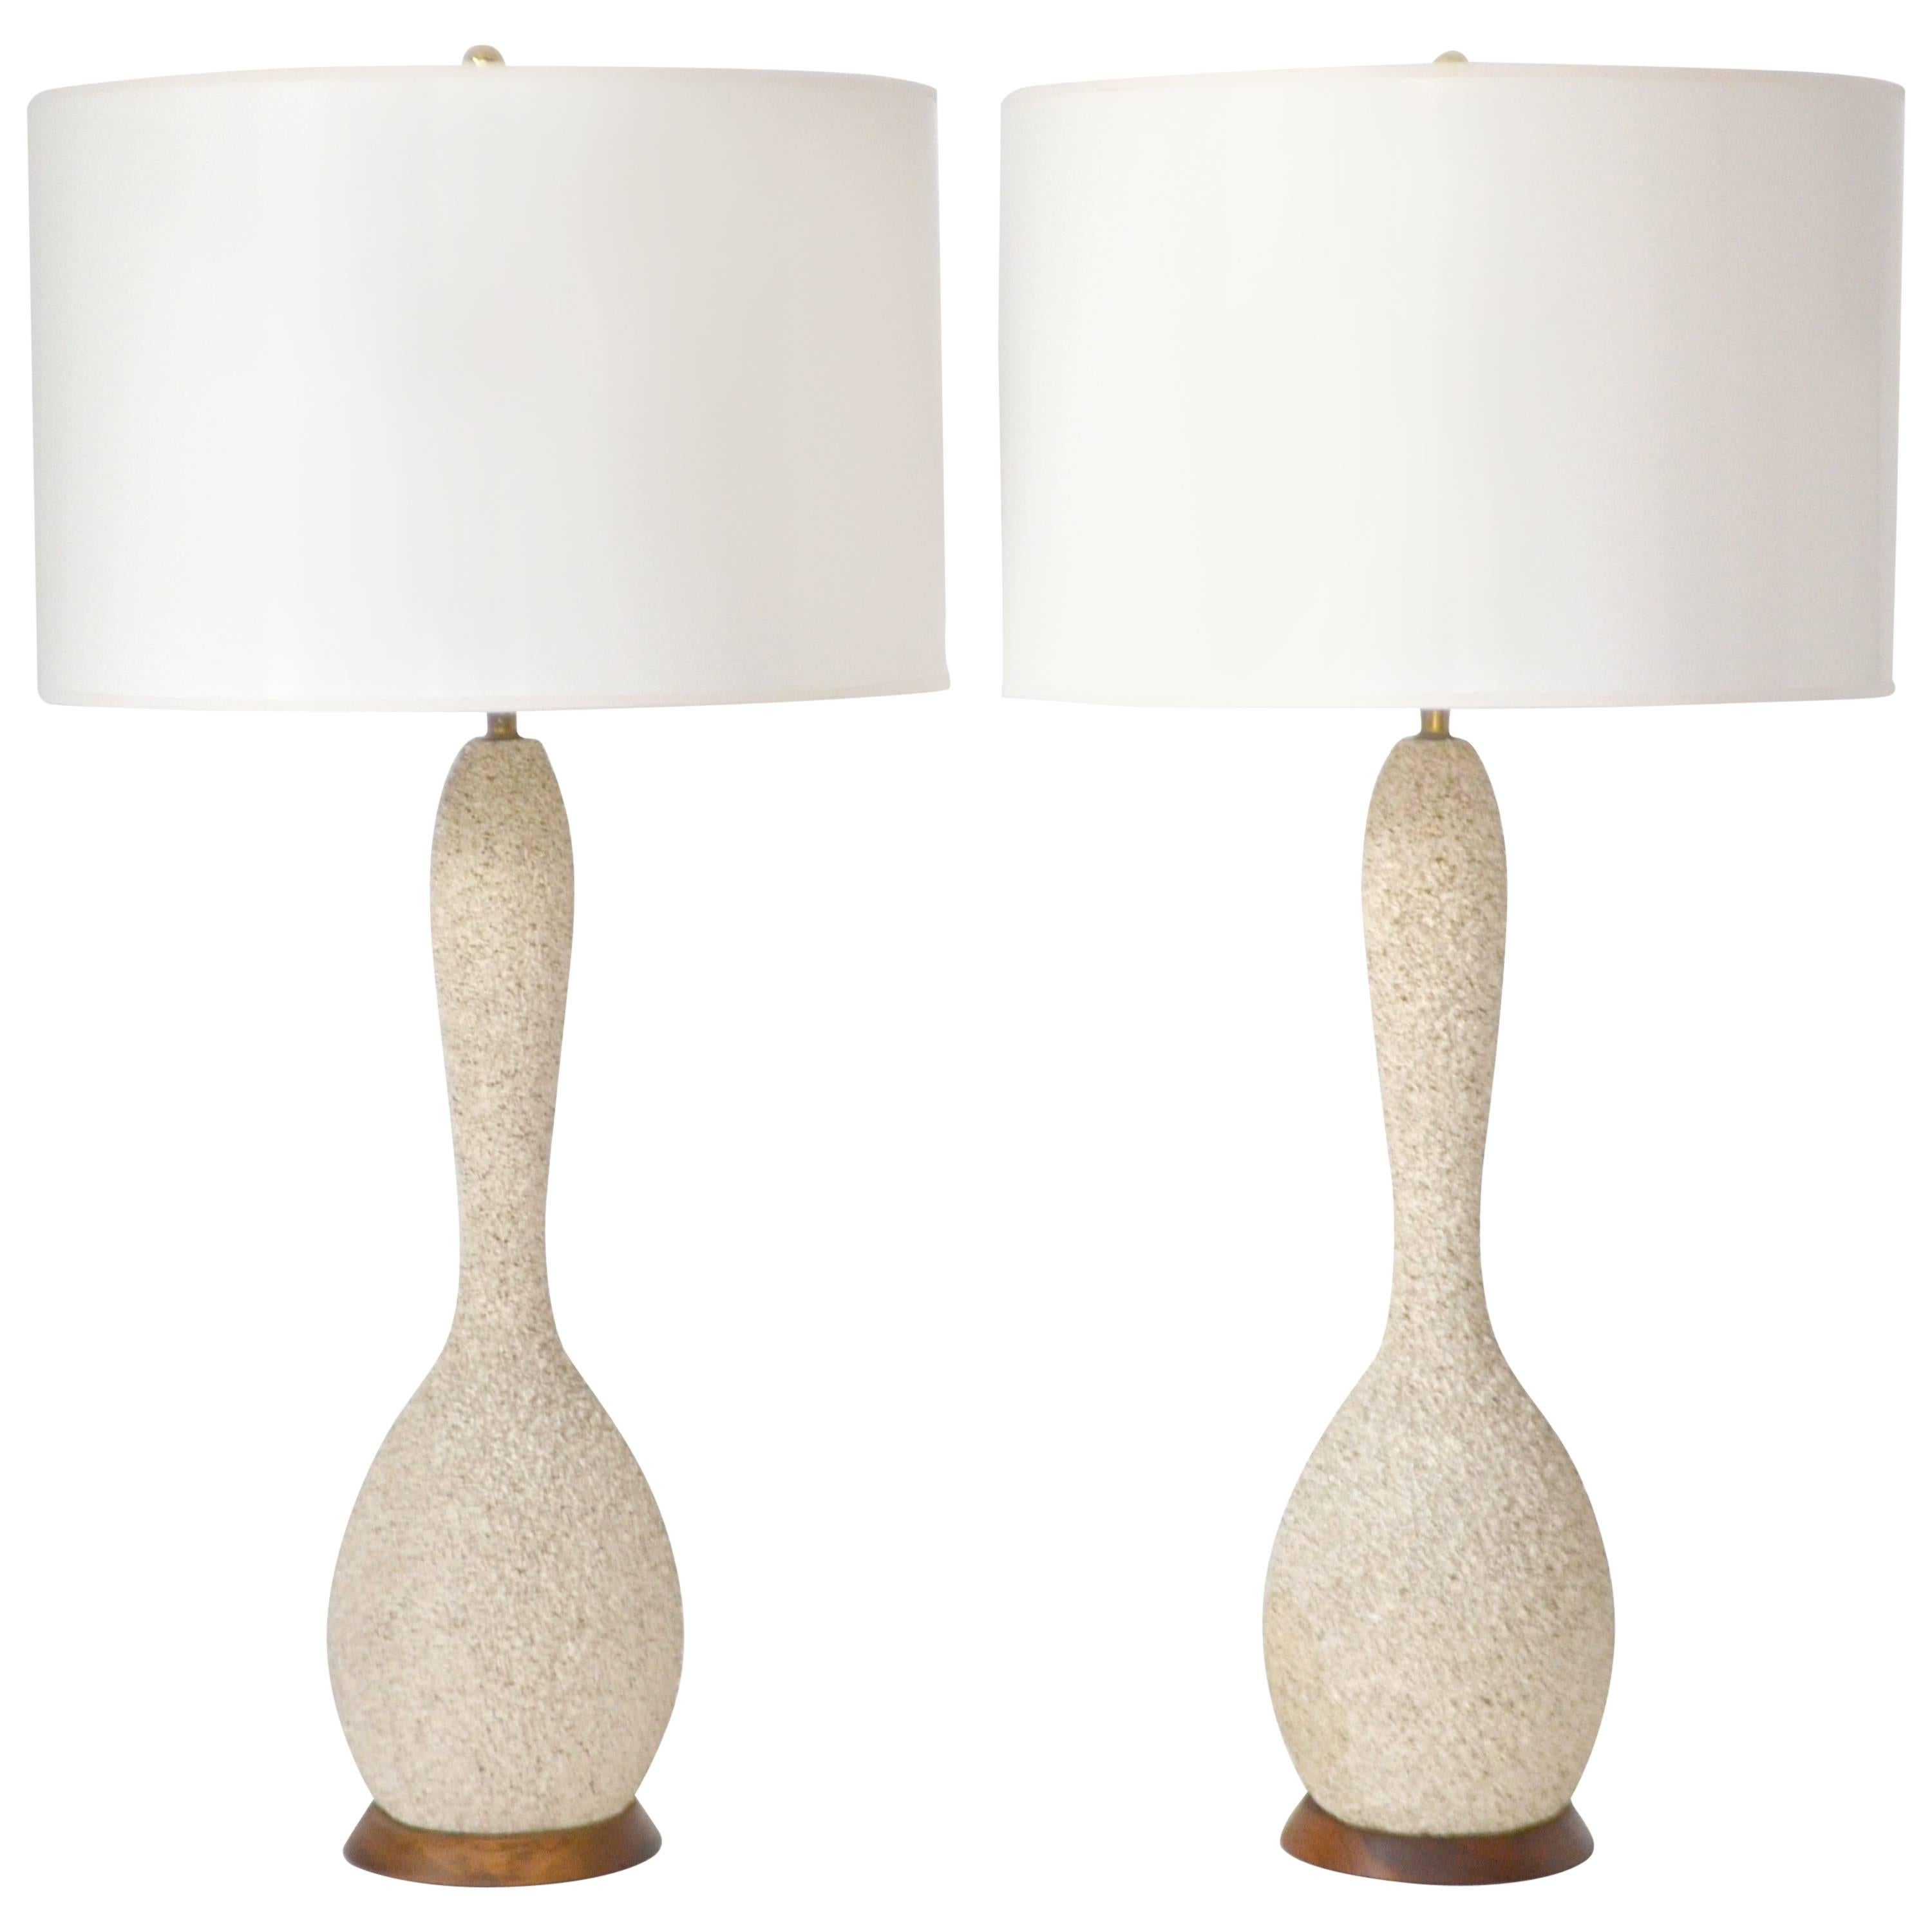 Pair of Mid-Century Sand Glazed Textured Ceramic Gourd Form Table Lamps For Sale